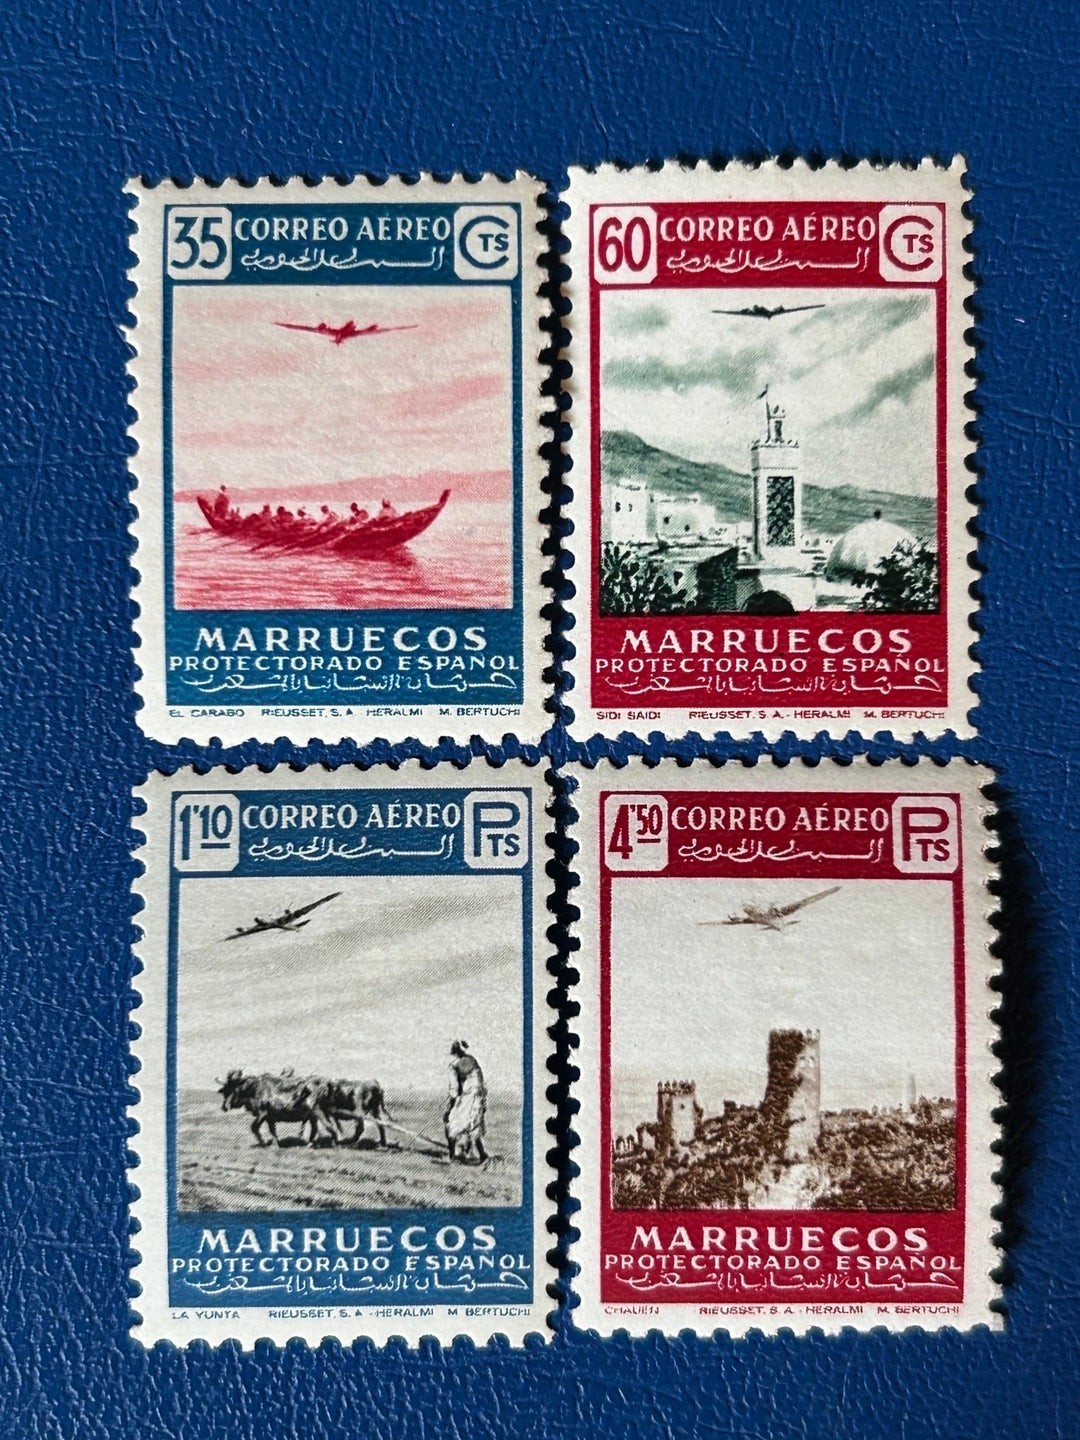 Sp. Morocco - Original Vintage Postage Stamps- 1953 - Landscapes & Airplanes - for the collector or crafter